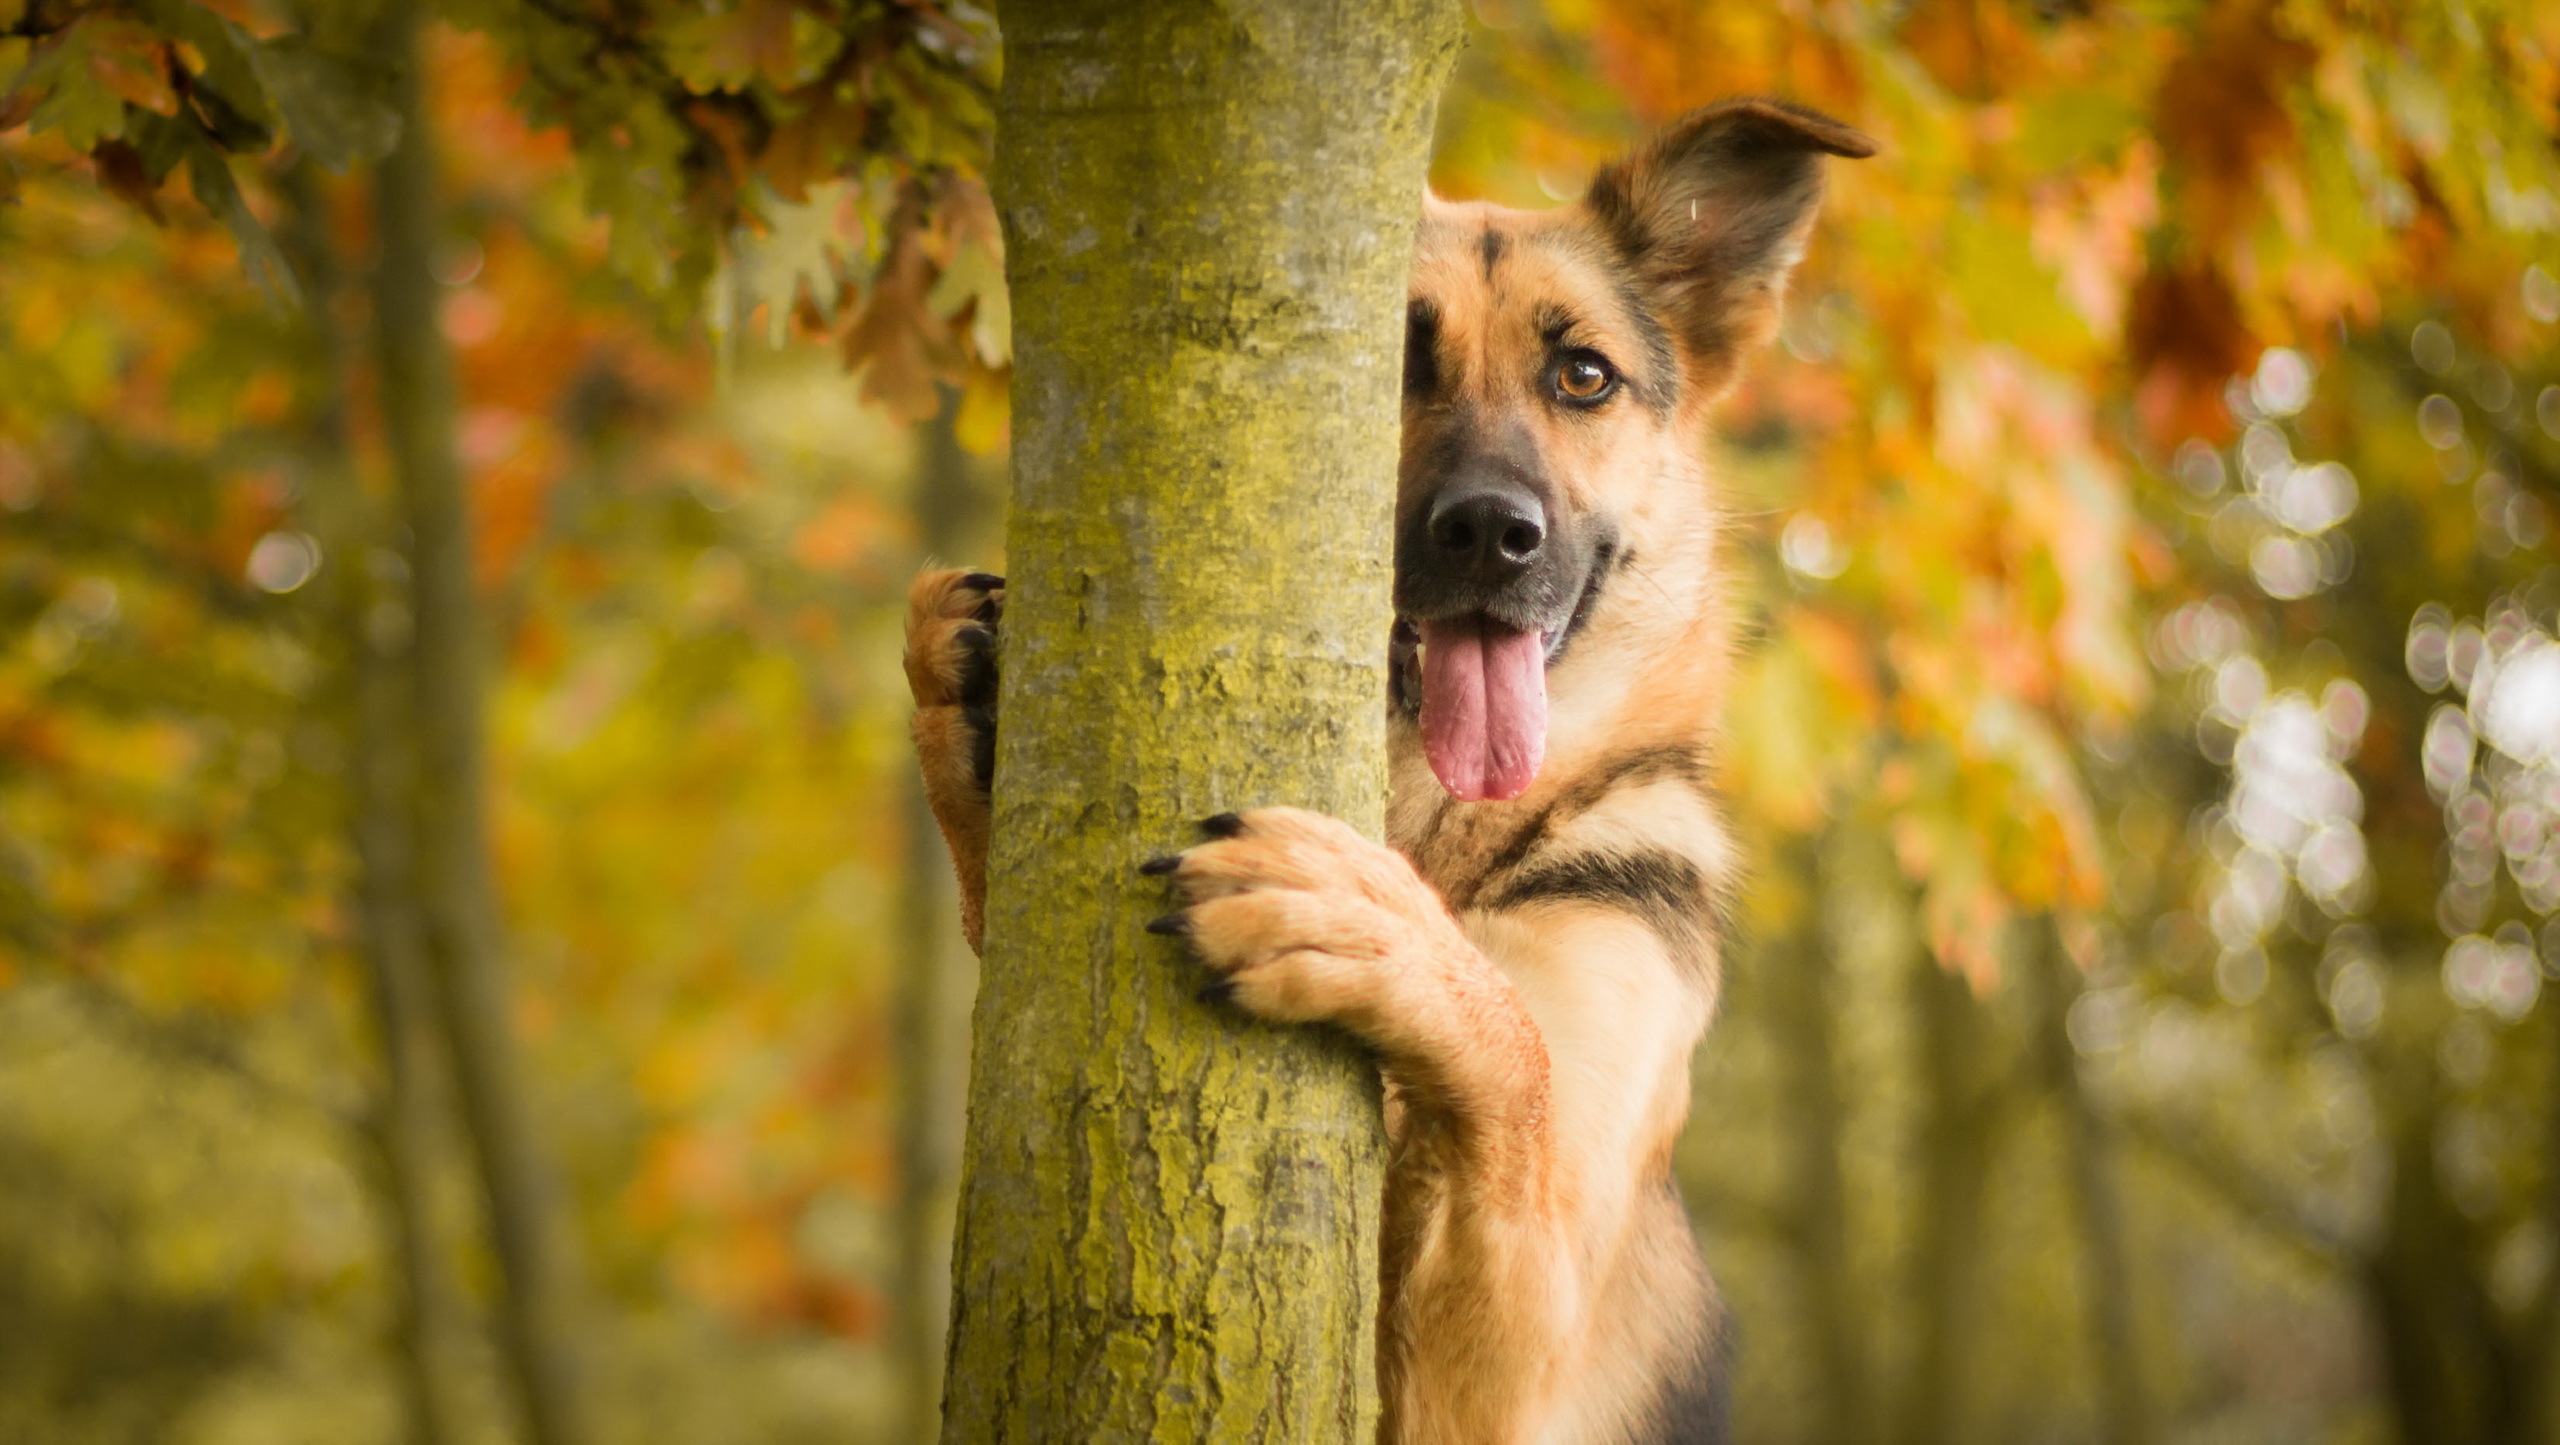 62635 download wallpaper animals, wood, tree, dog, protruding tongue, tongue stuck out screensavers and pictures for free